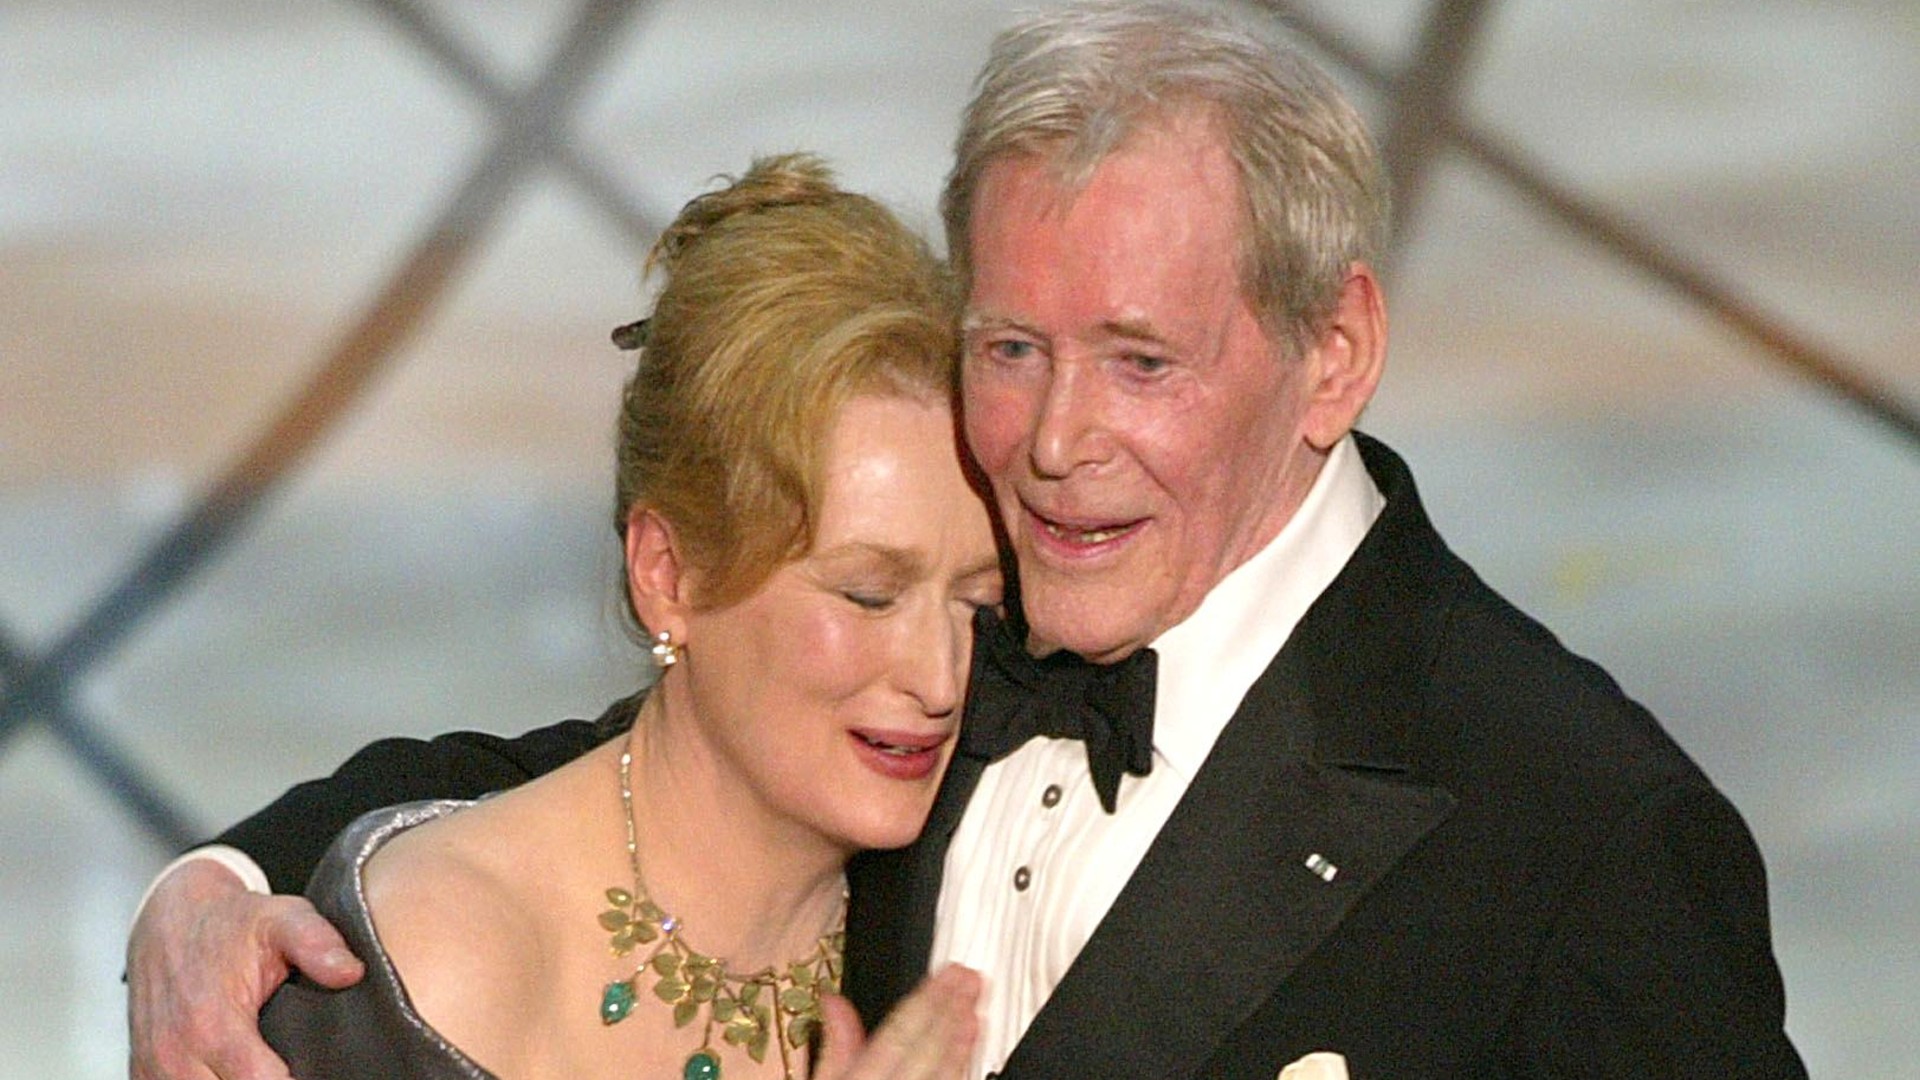 12 Academy Awards Milestones: From 'All About Eve' to Meryl Streep